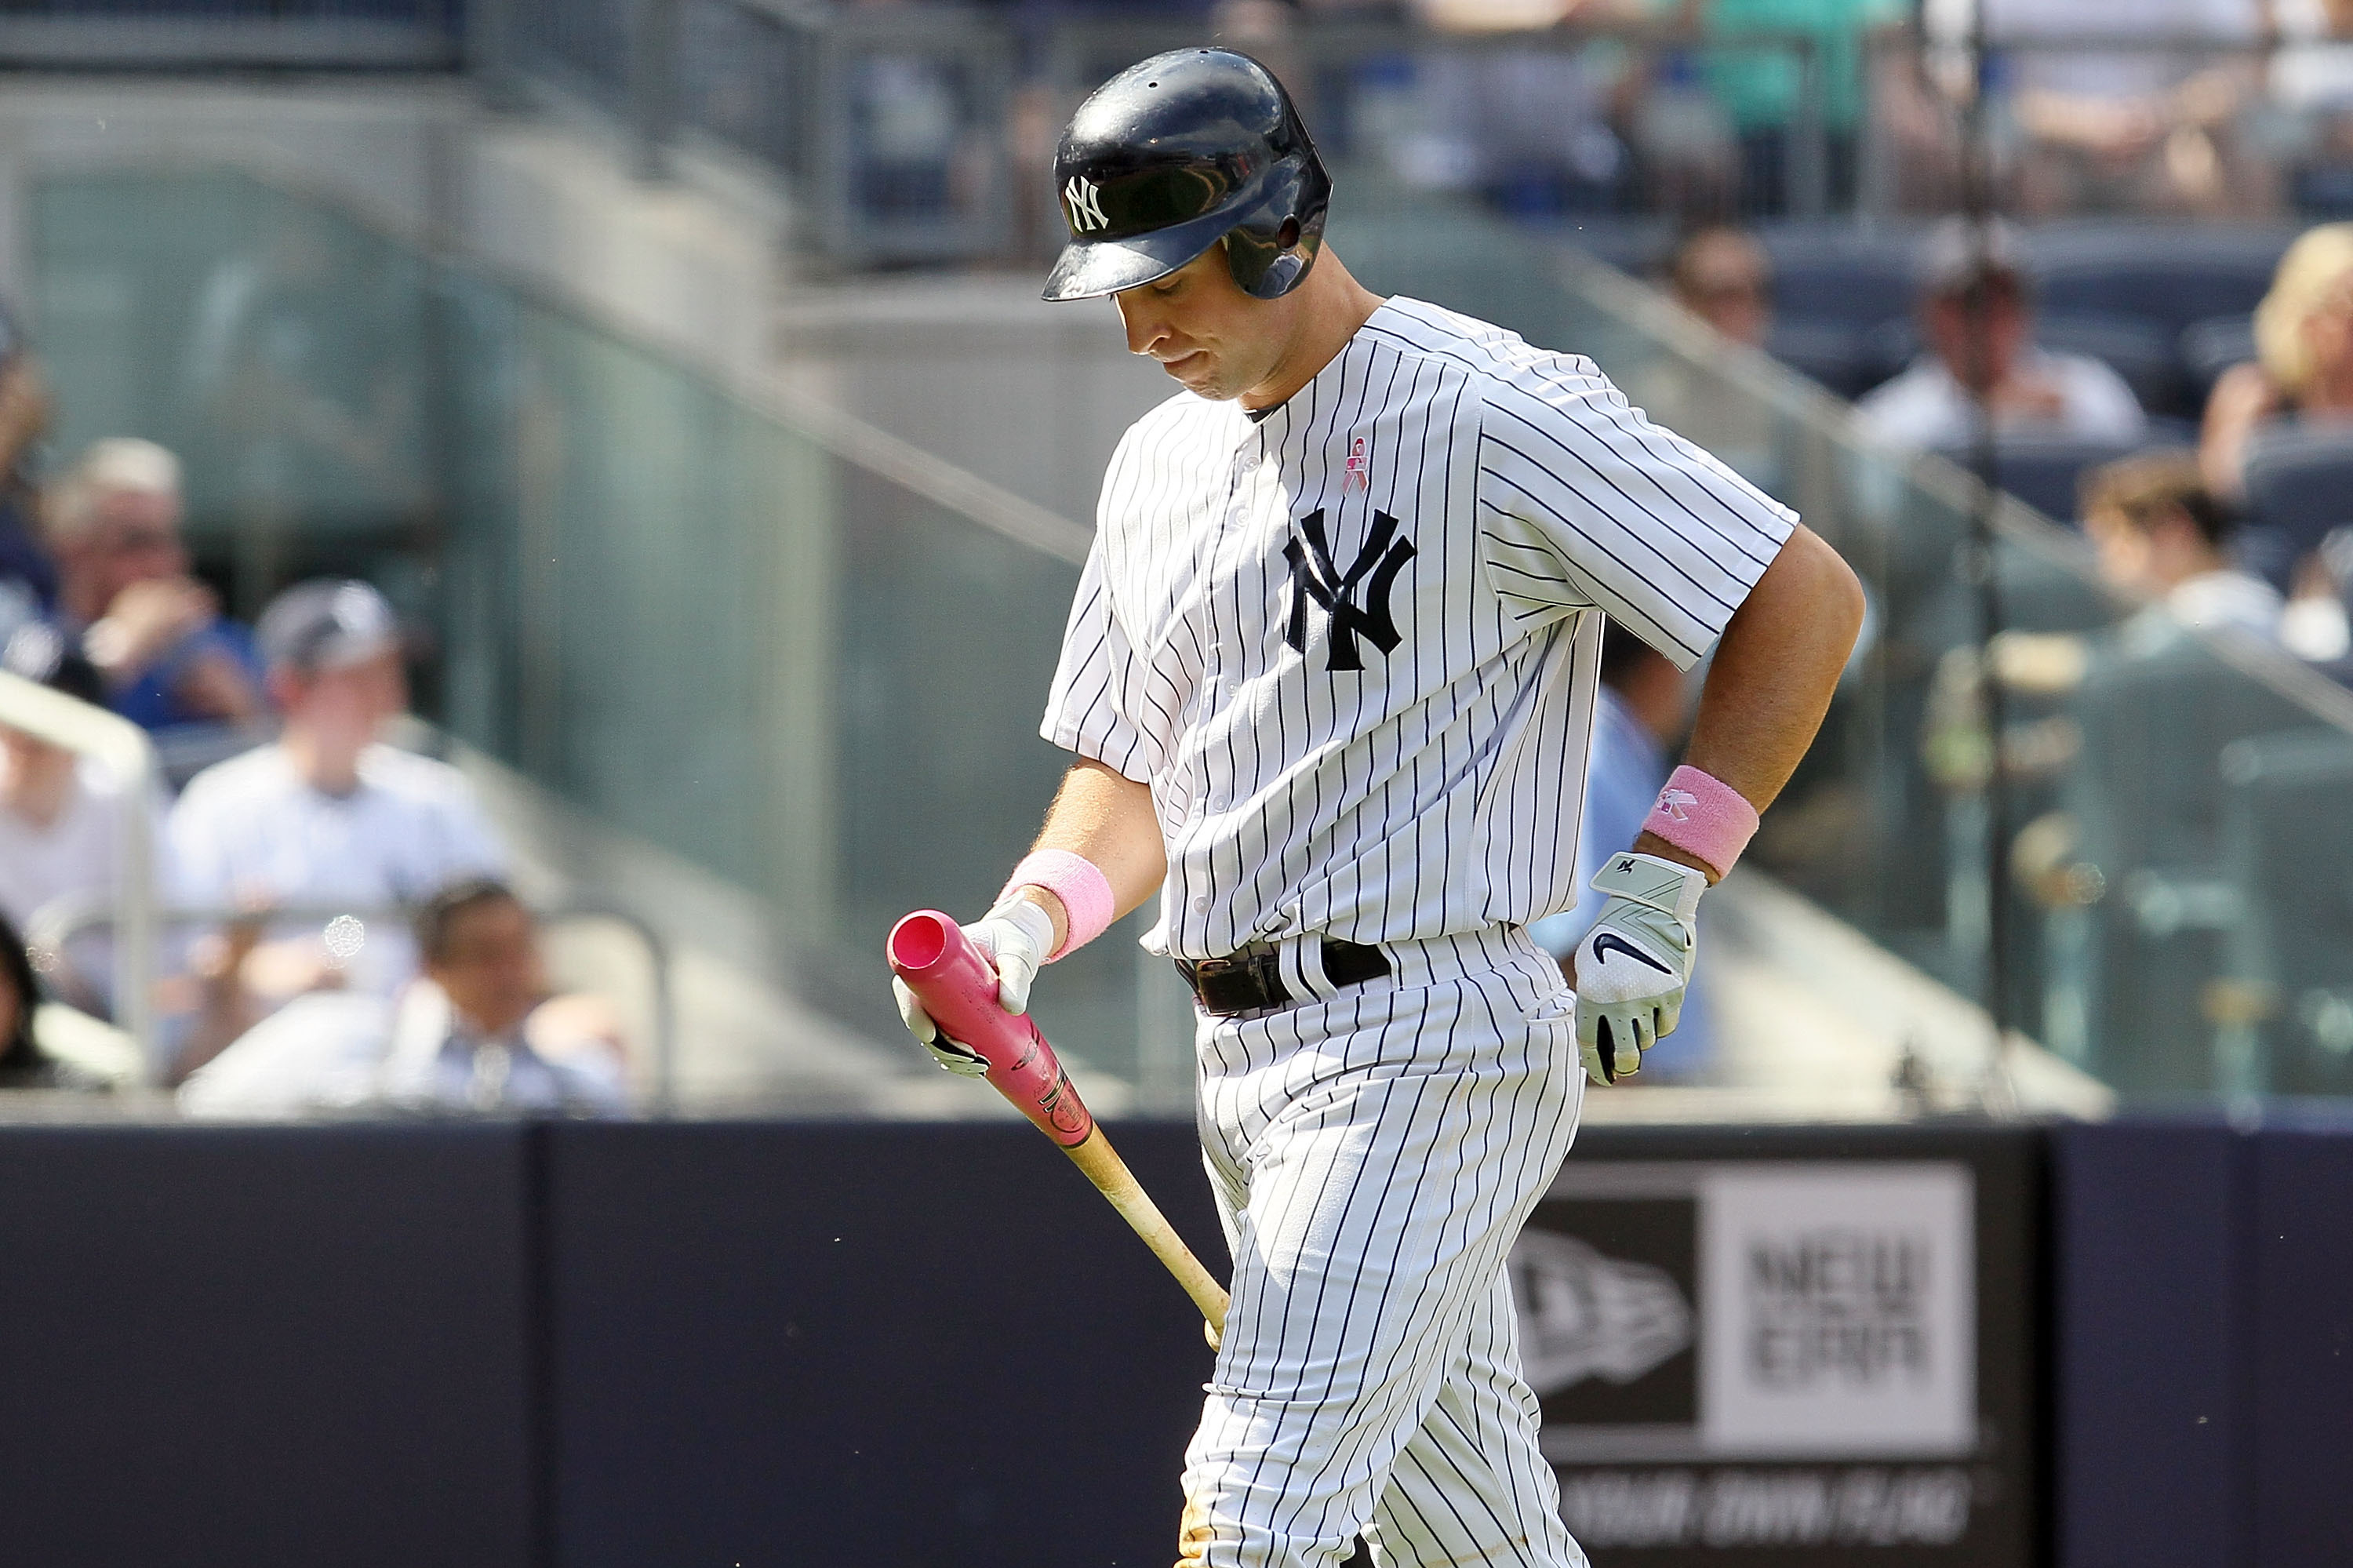 Yankees' Mark Teixeira out of WBC with strained right wrist, will be  evaluated by team doctors Wednesday - Newsday